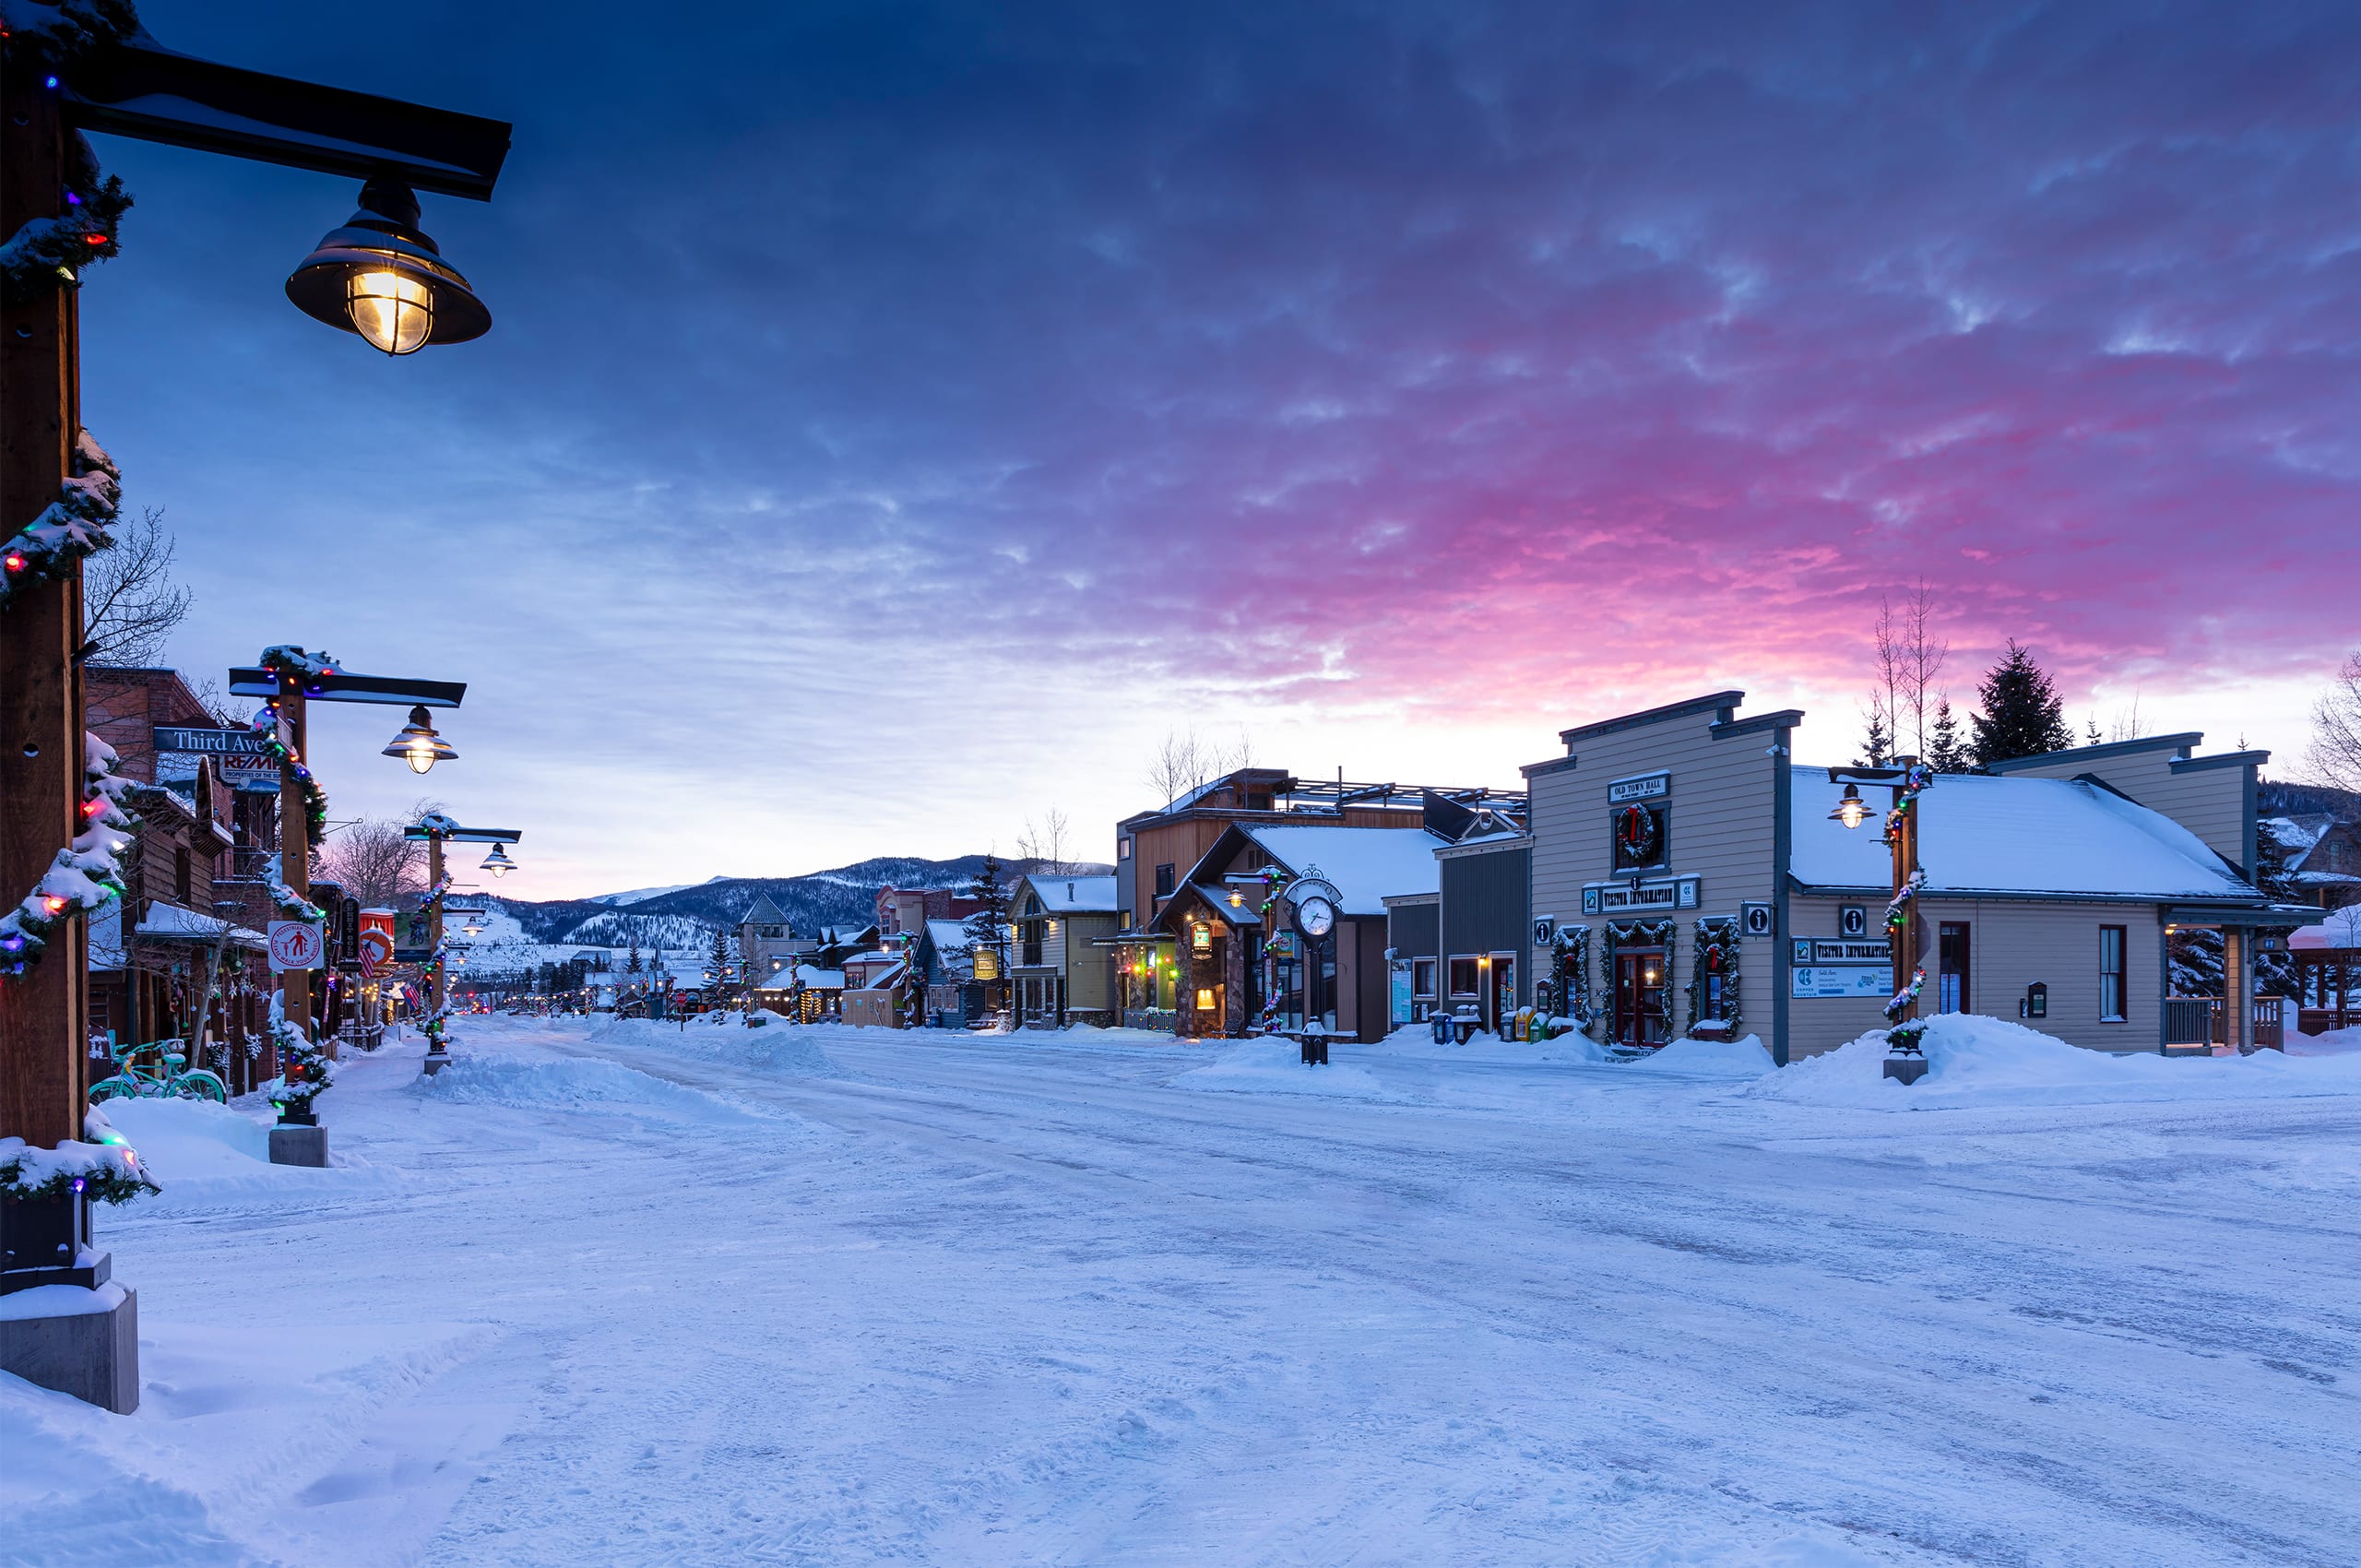 Frisco Main Street and Info Center in winter with purple sky